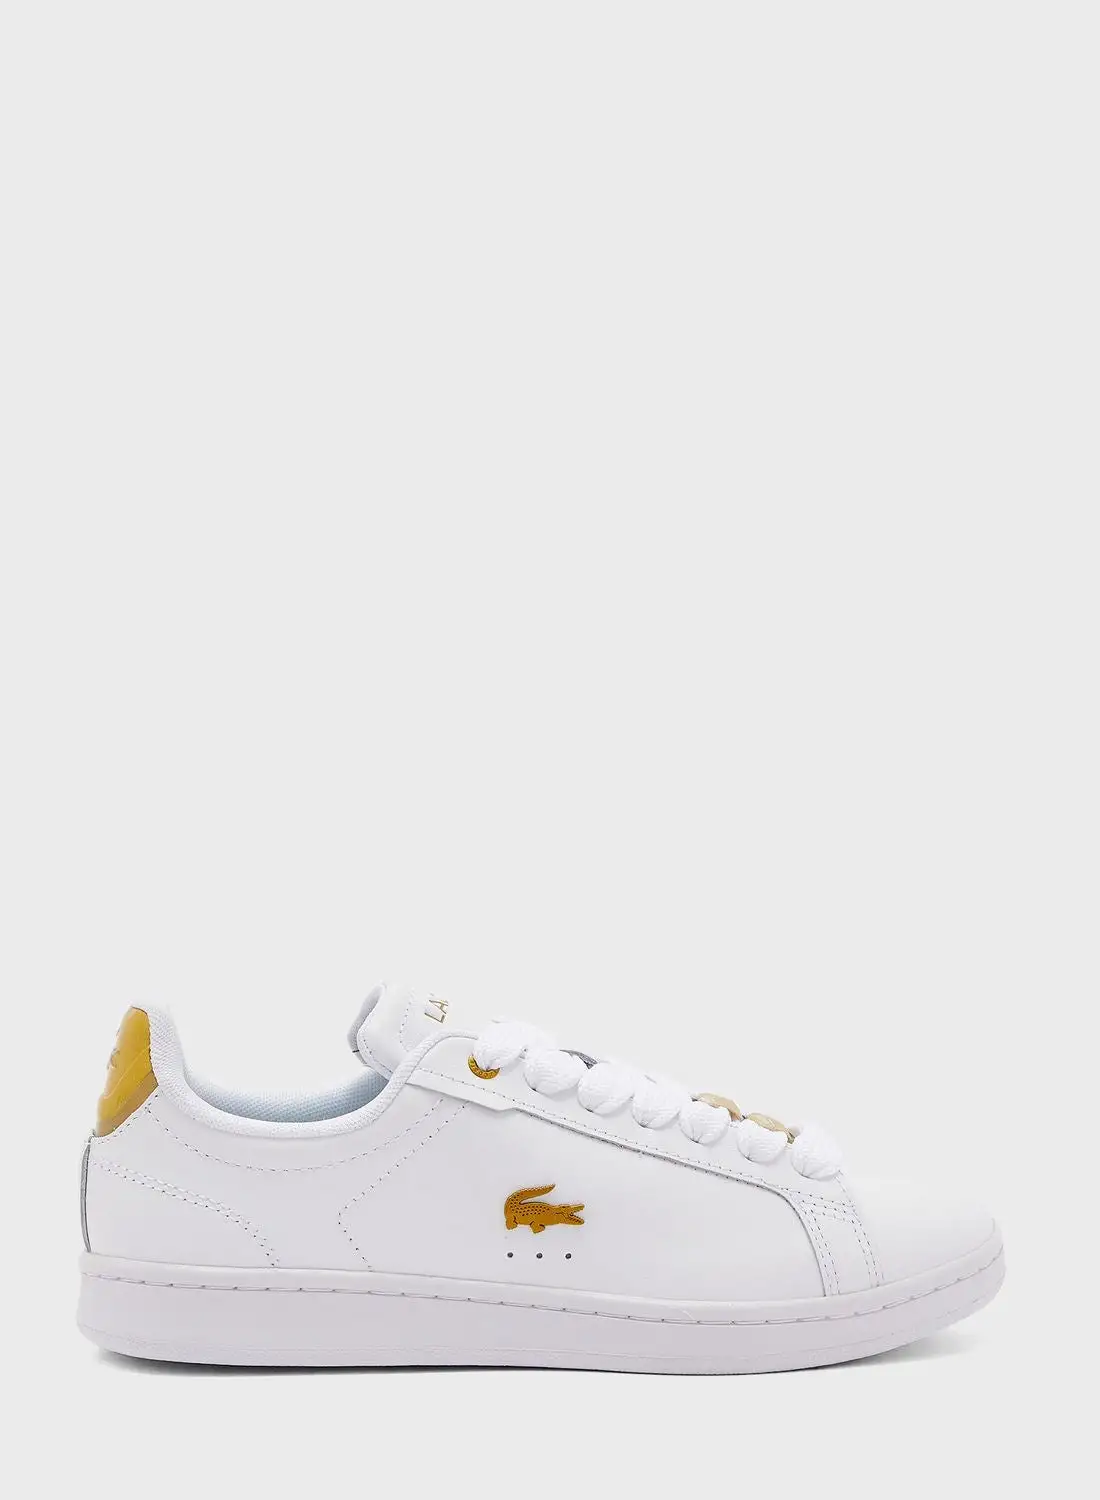 LACOSTE Carnaby Pro 123 5 Low Top Sneakers